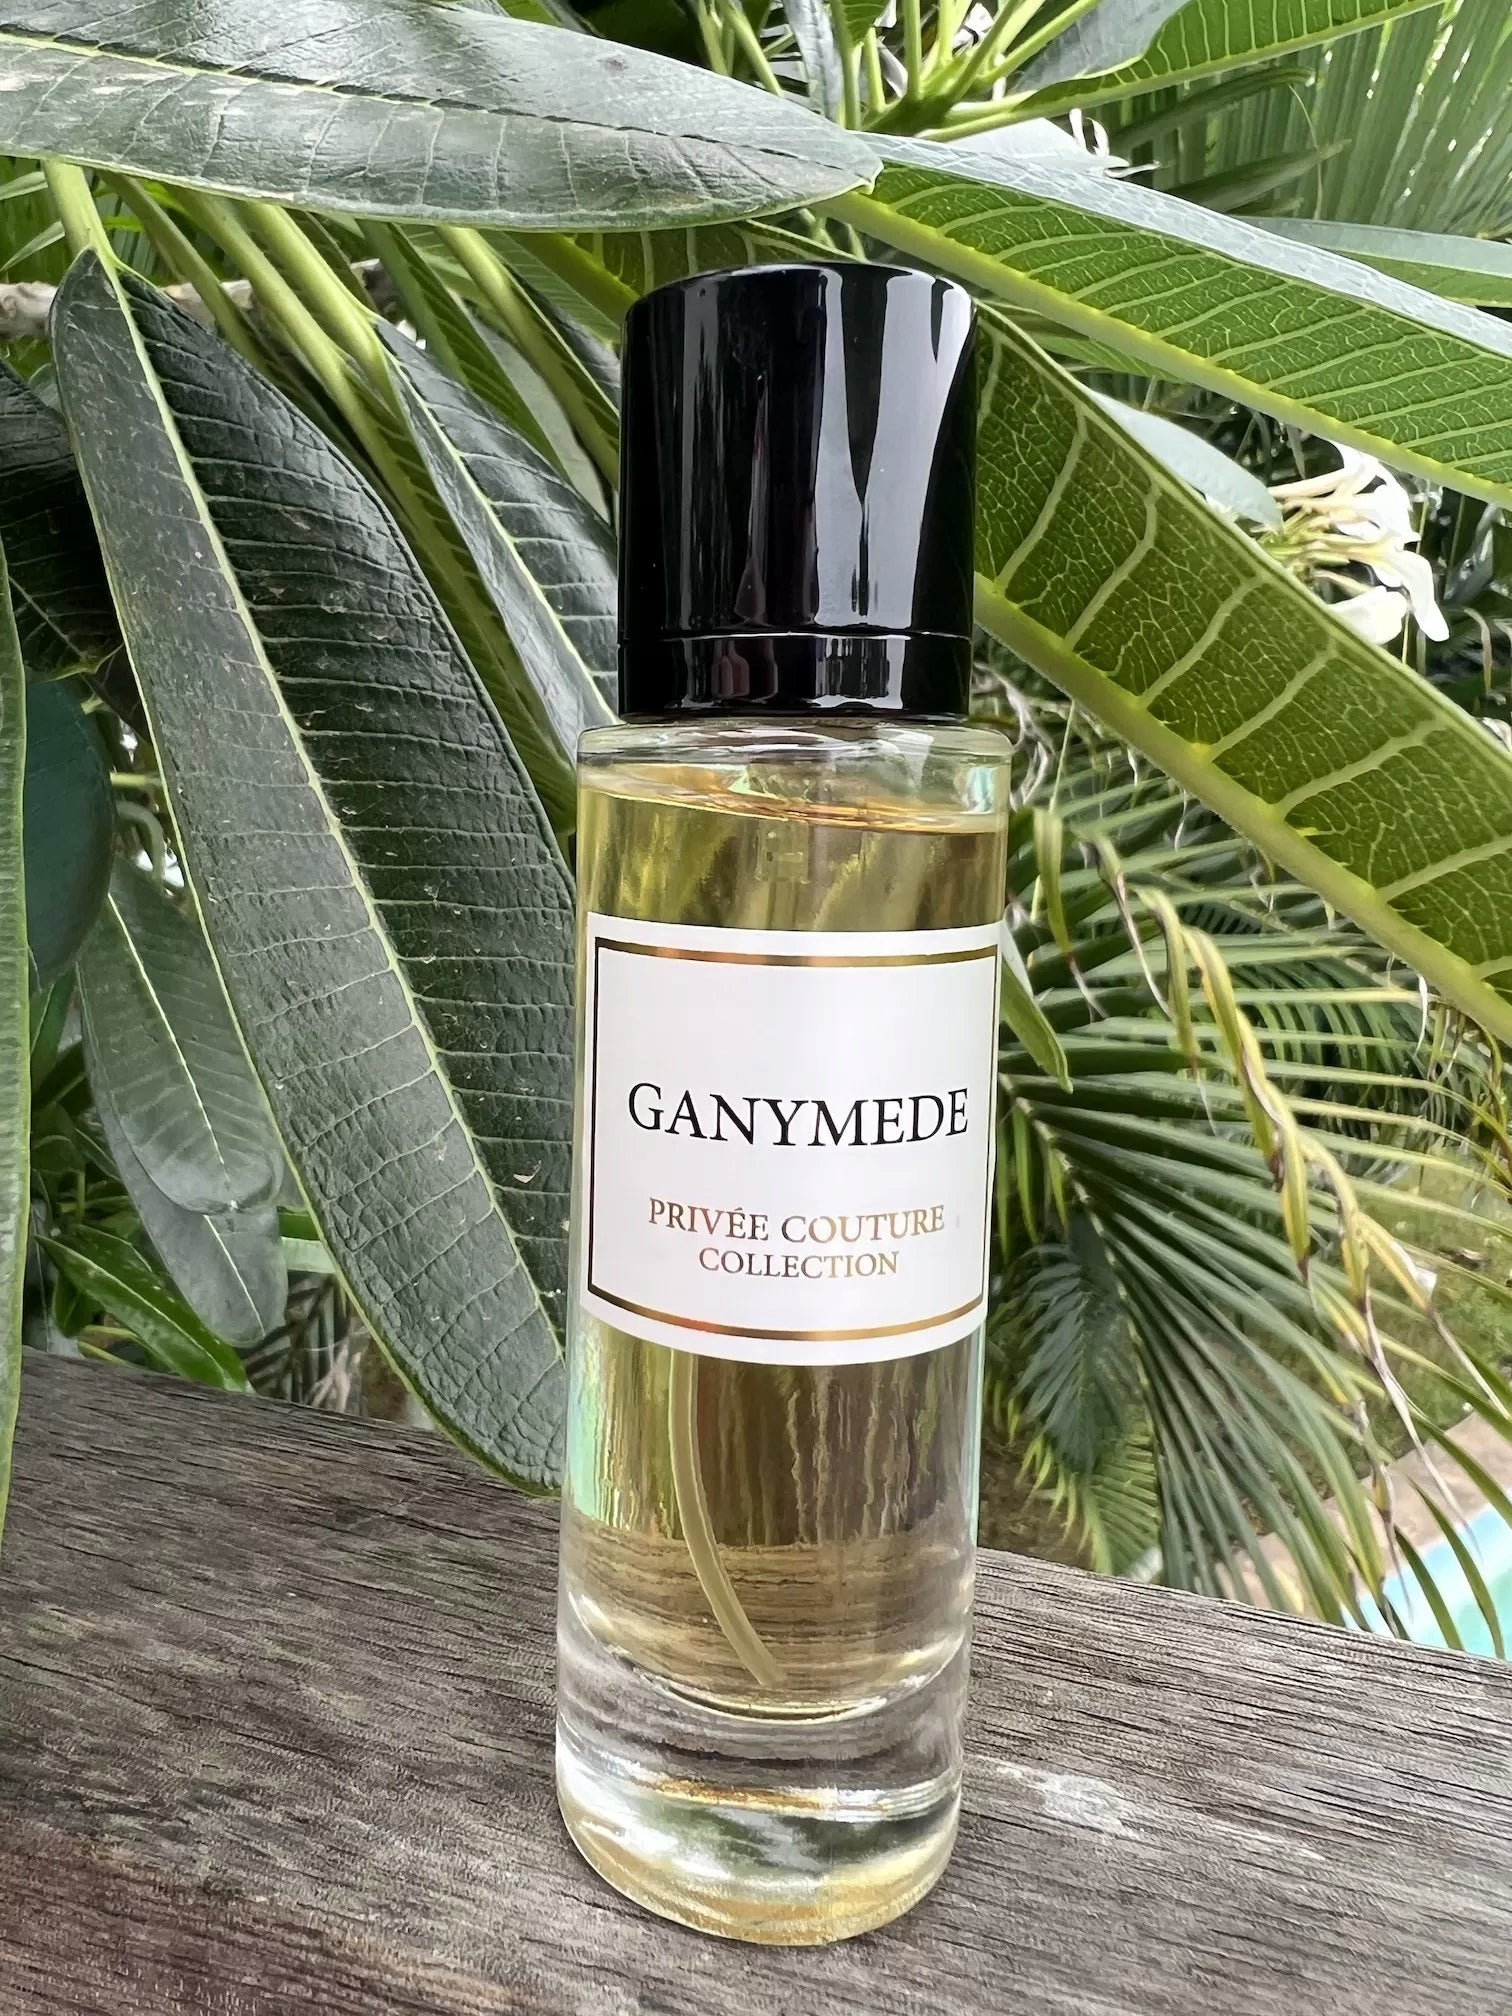 The "GANYMEDE PRIVEE COUTURE COLLECTION" perfume by Ard Al Zaafaran is showcased in a natural setting, placed on a wooden surface with lush green leaves in the background. The transparent glass bottle with a black cap contains a golden-yellow liquid. The label features the name "GANYMEDE" in elegant black font on a white background, with "PRIVEE COUTURE COLLECTION" beneath it.